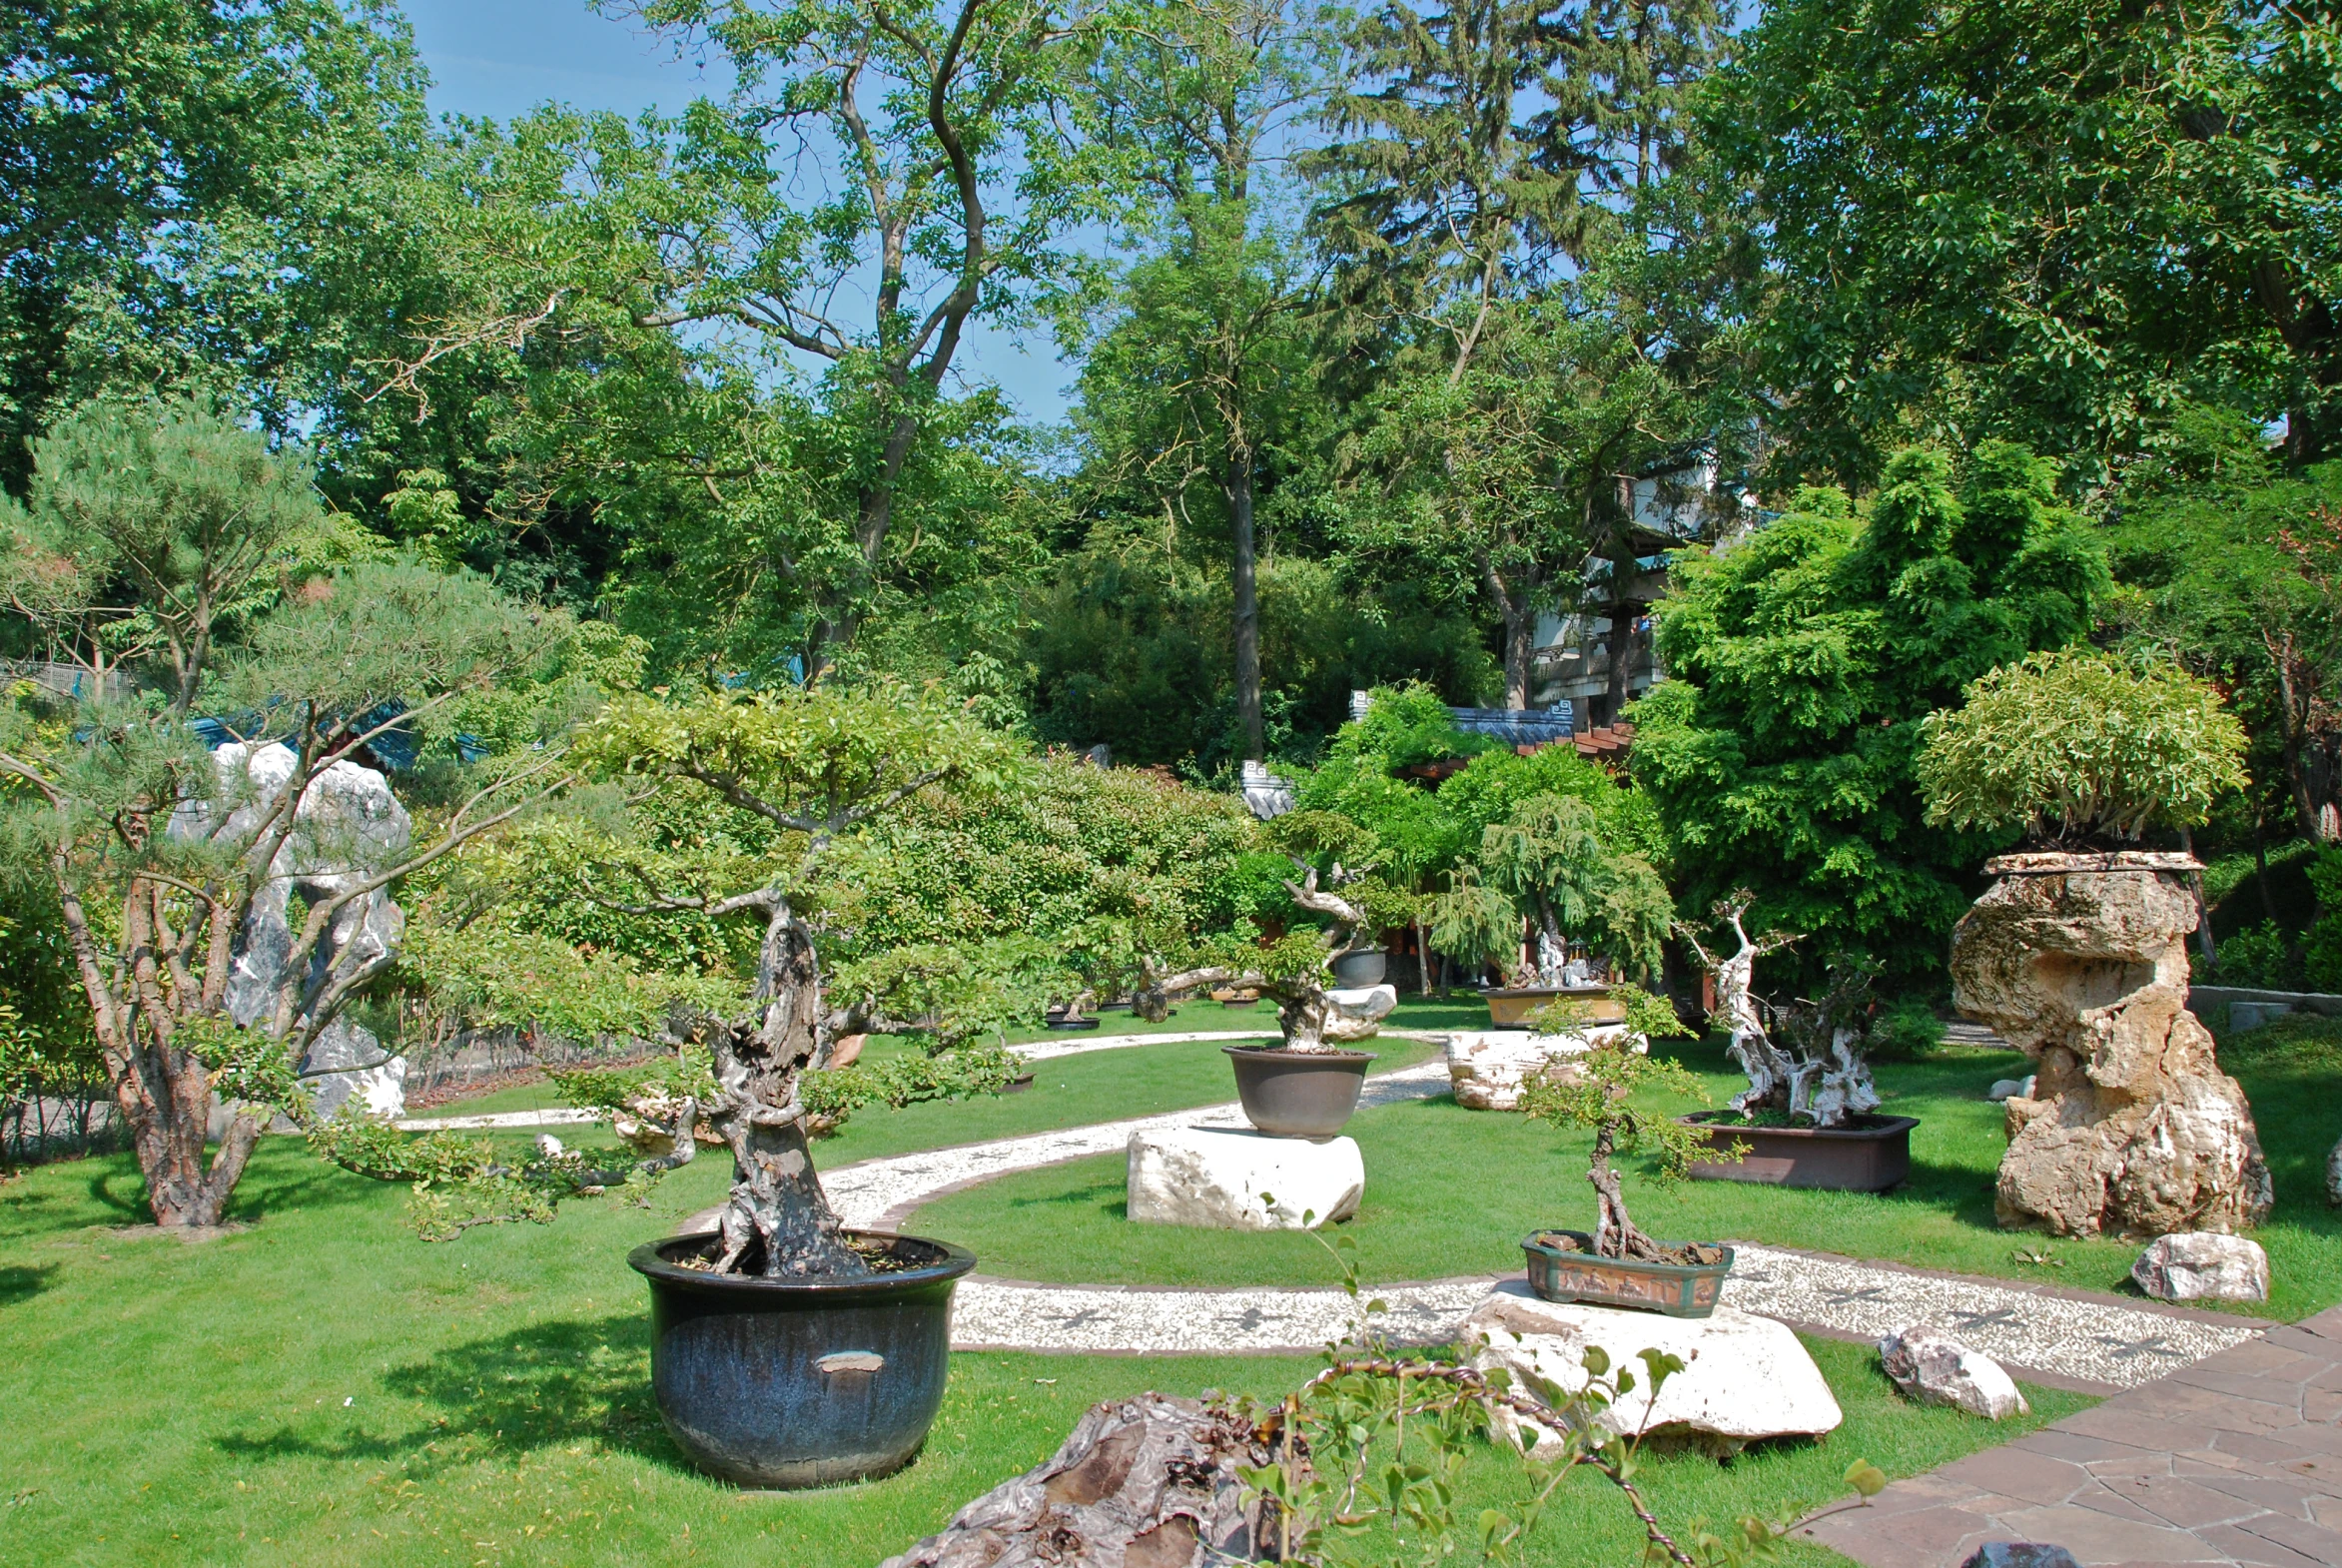 an open area with trees, rocks and a statue